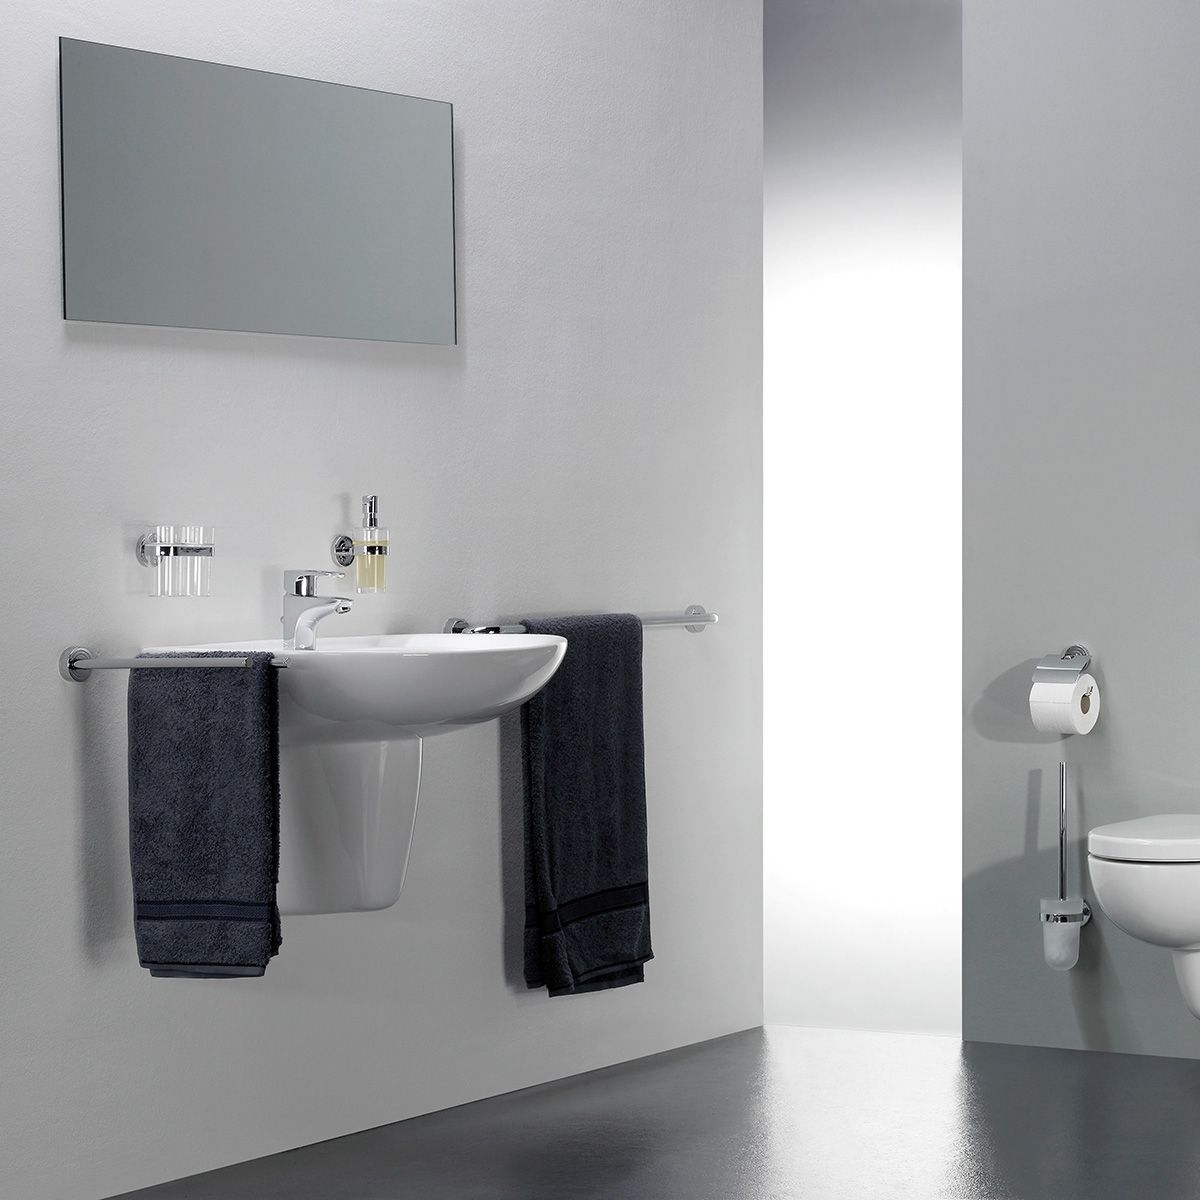 LED Lighted Wall Mirrors are Great All-Around Mirrors